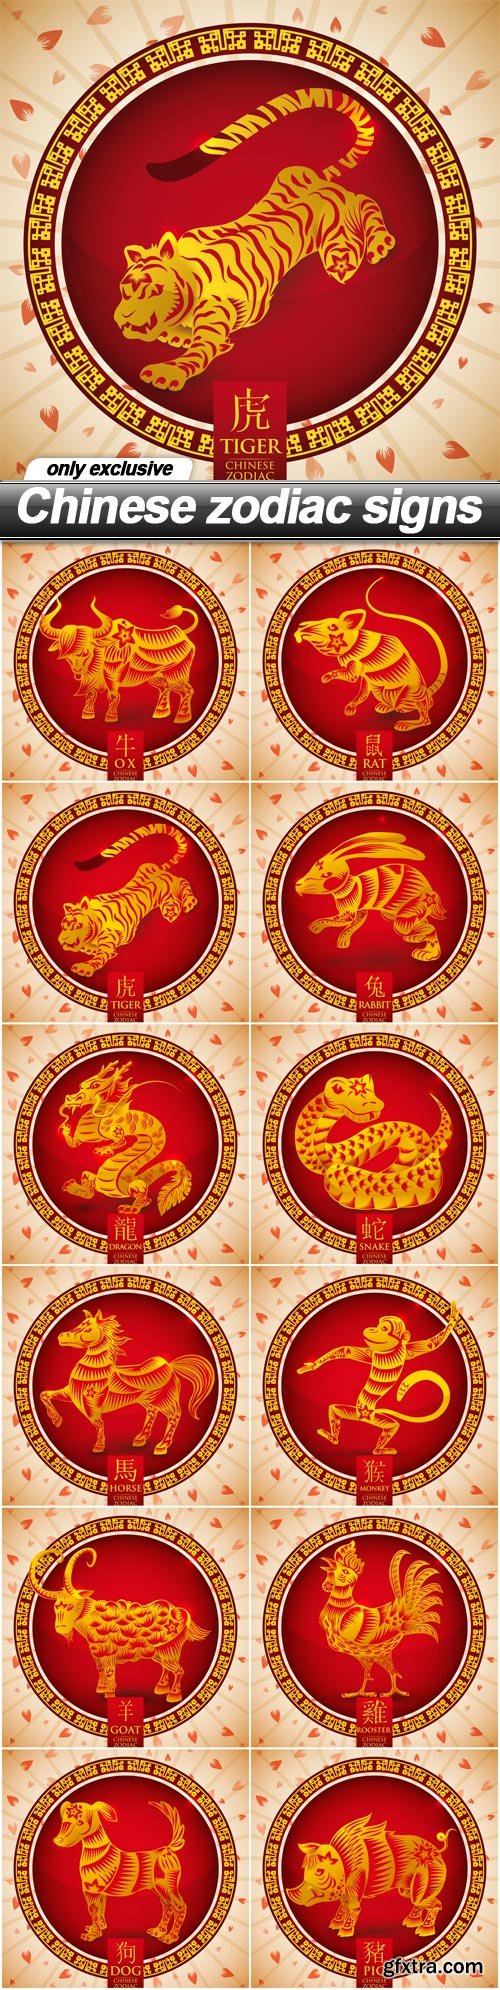 Chinese zodiac signs - 12 EPS